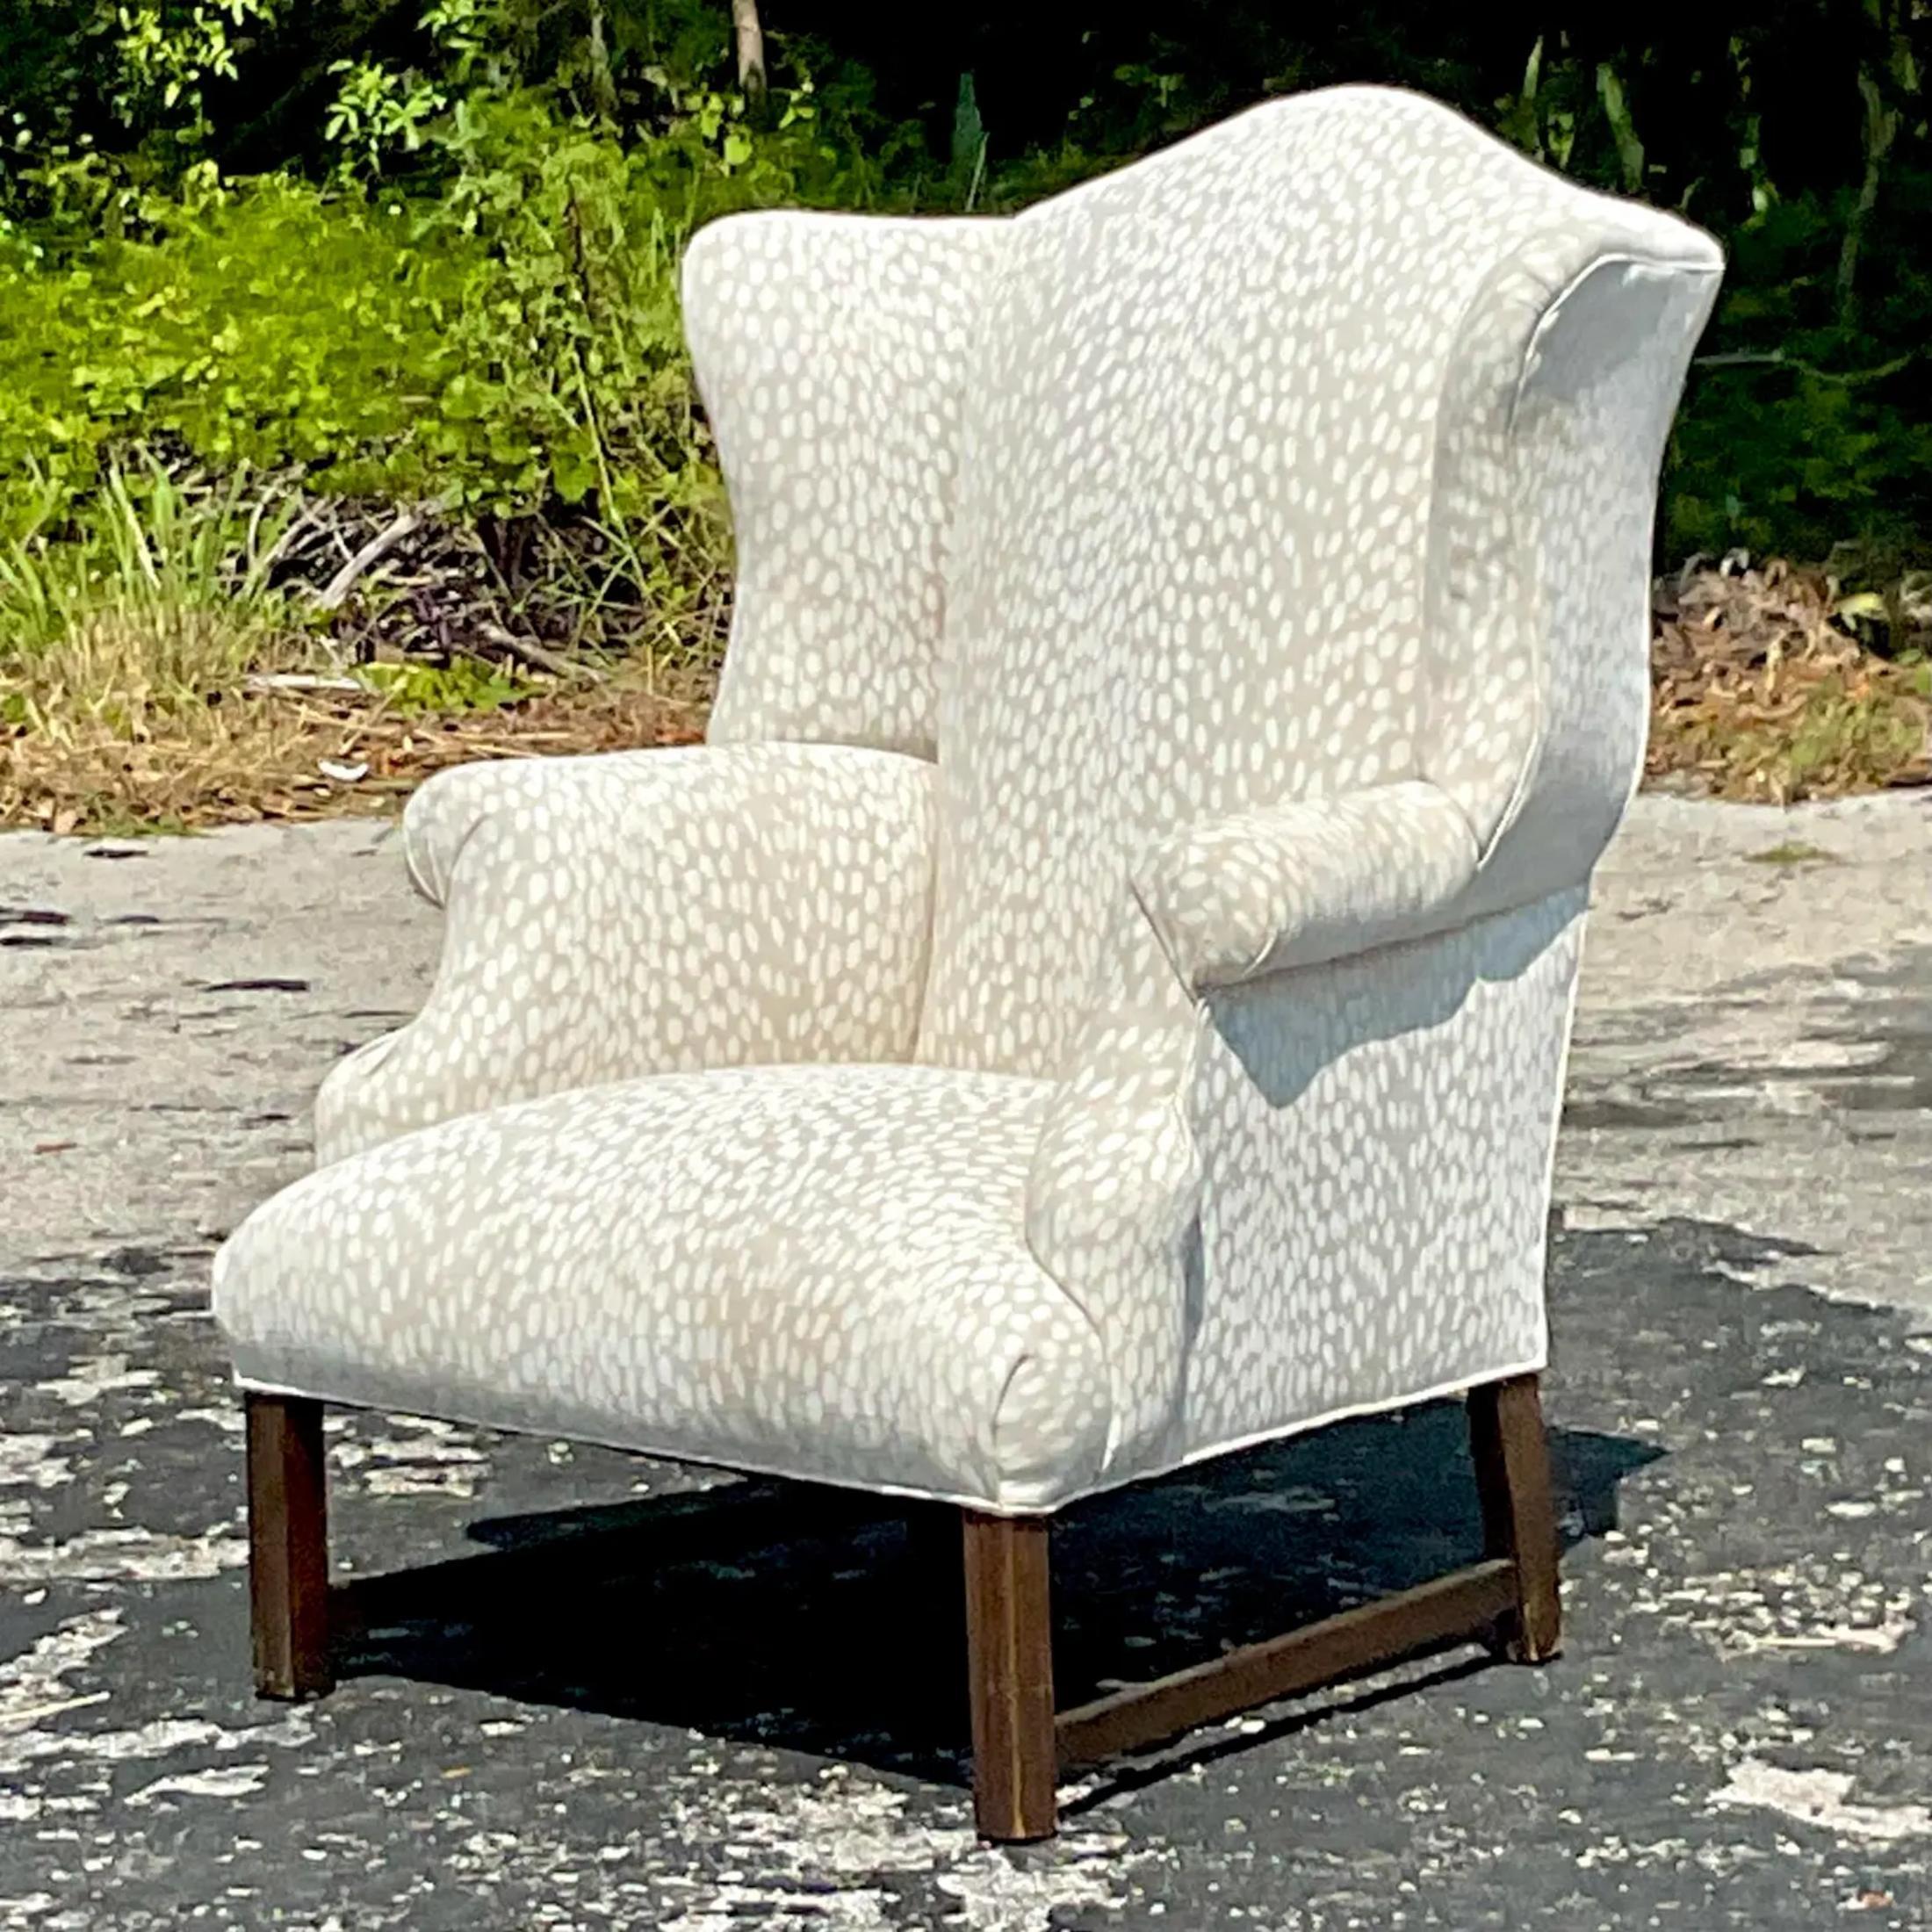 A fabulous vintage Boho wingback chair. A chic fawn print design in pale neutral colors. Acquired from a Palm Beach estate